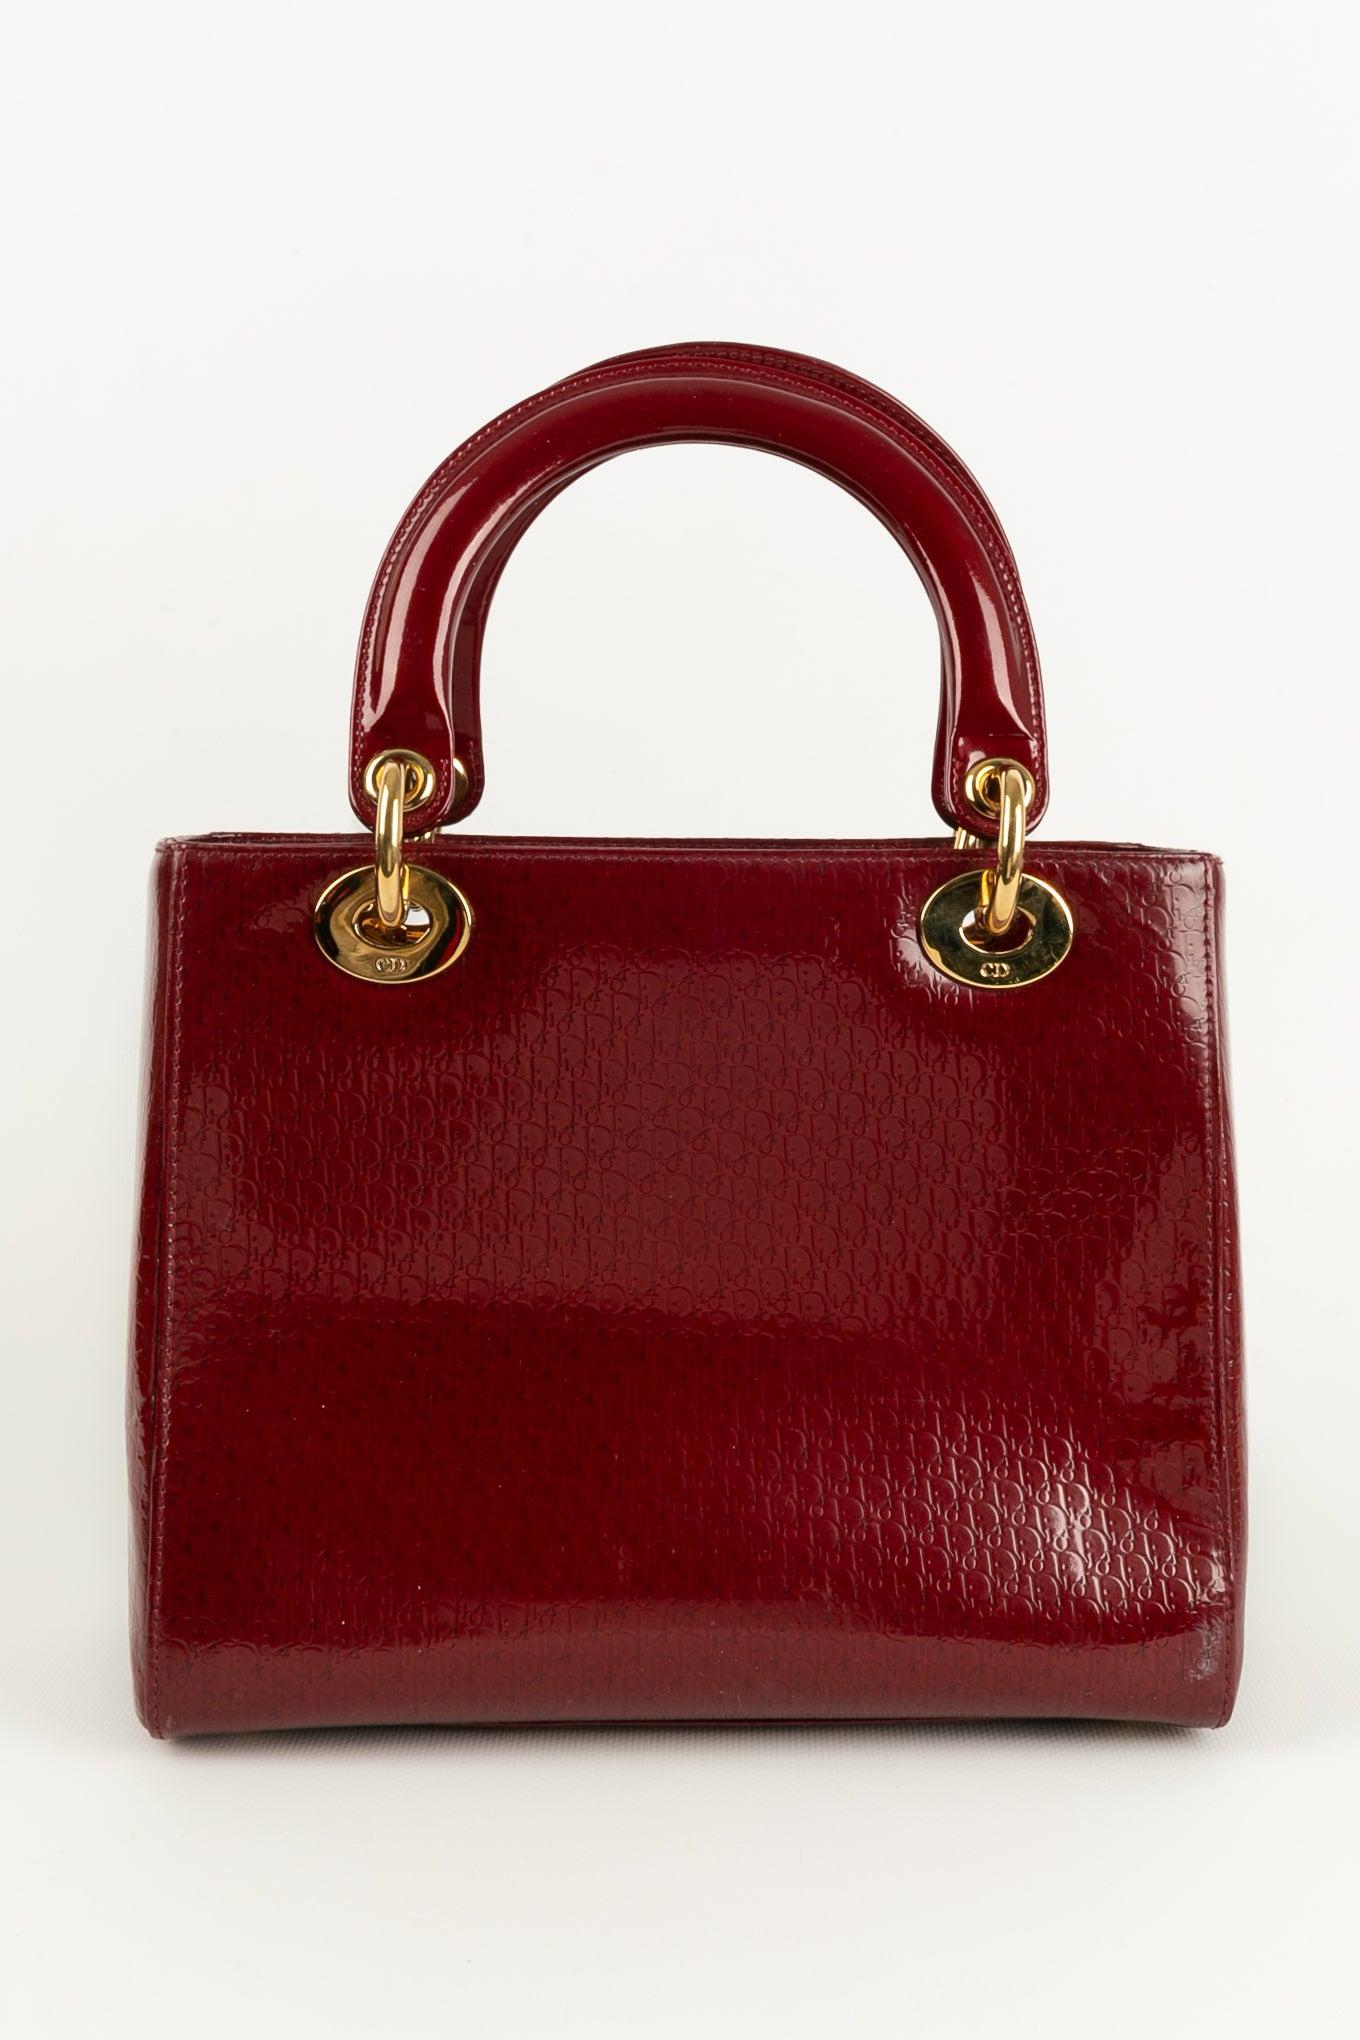 Lady Dior Red Patent Leather Handbag In Good Condition For Sale In SAINT-OUEN-SUR-SEINE, FR